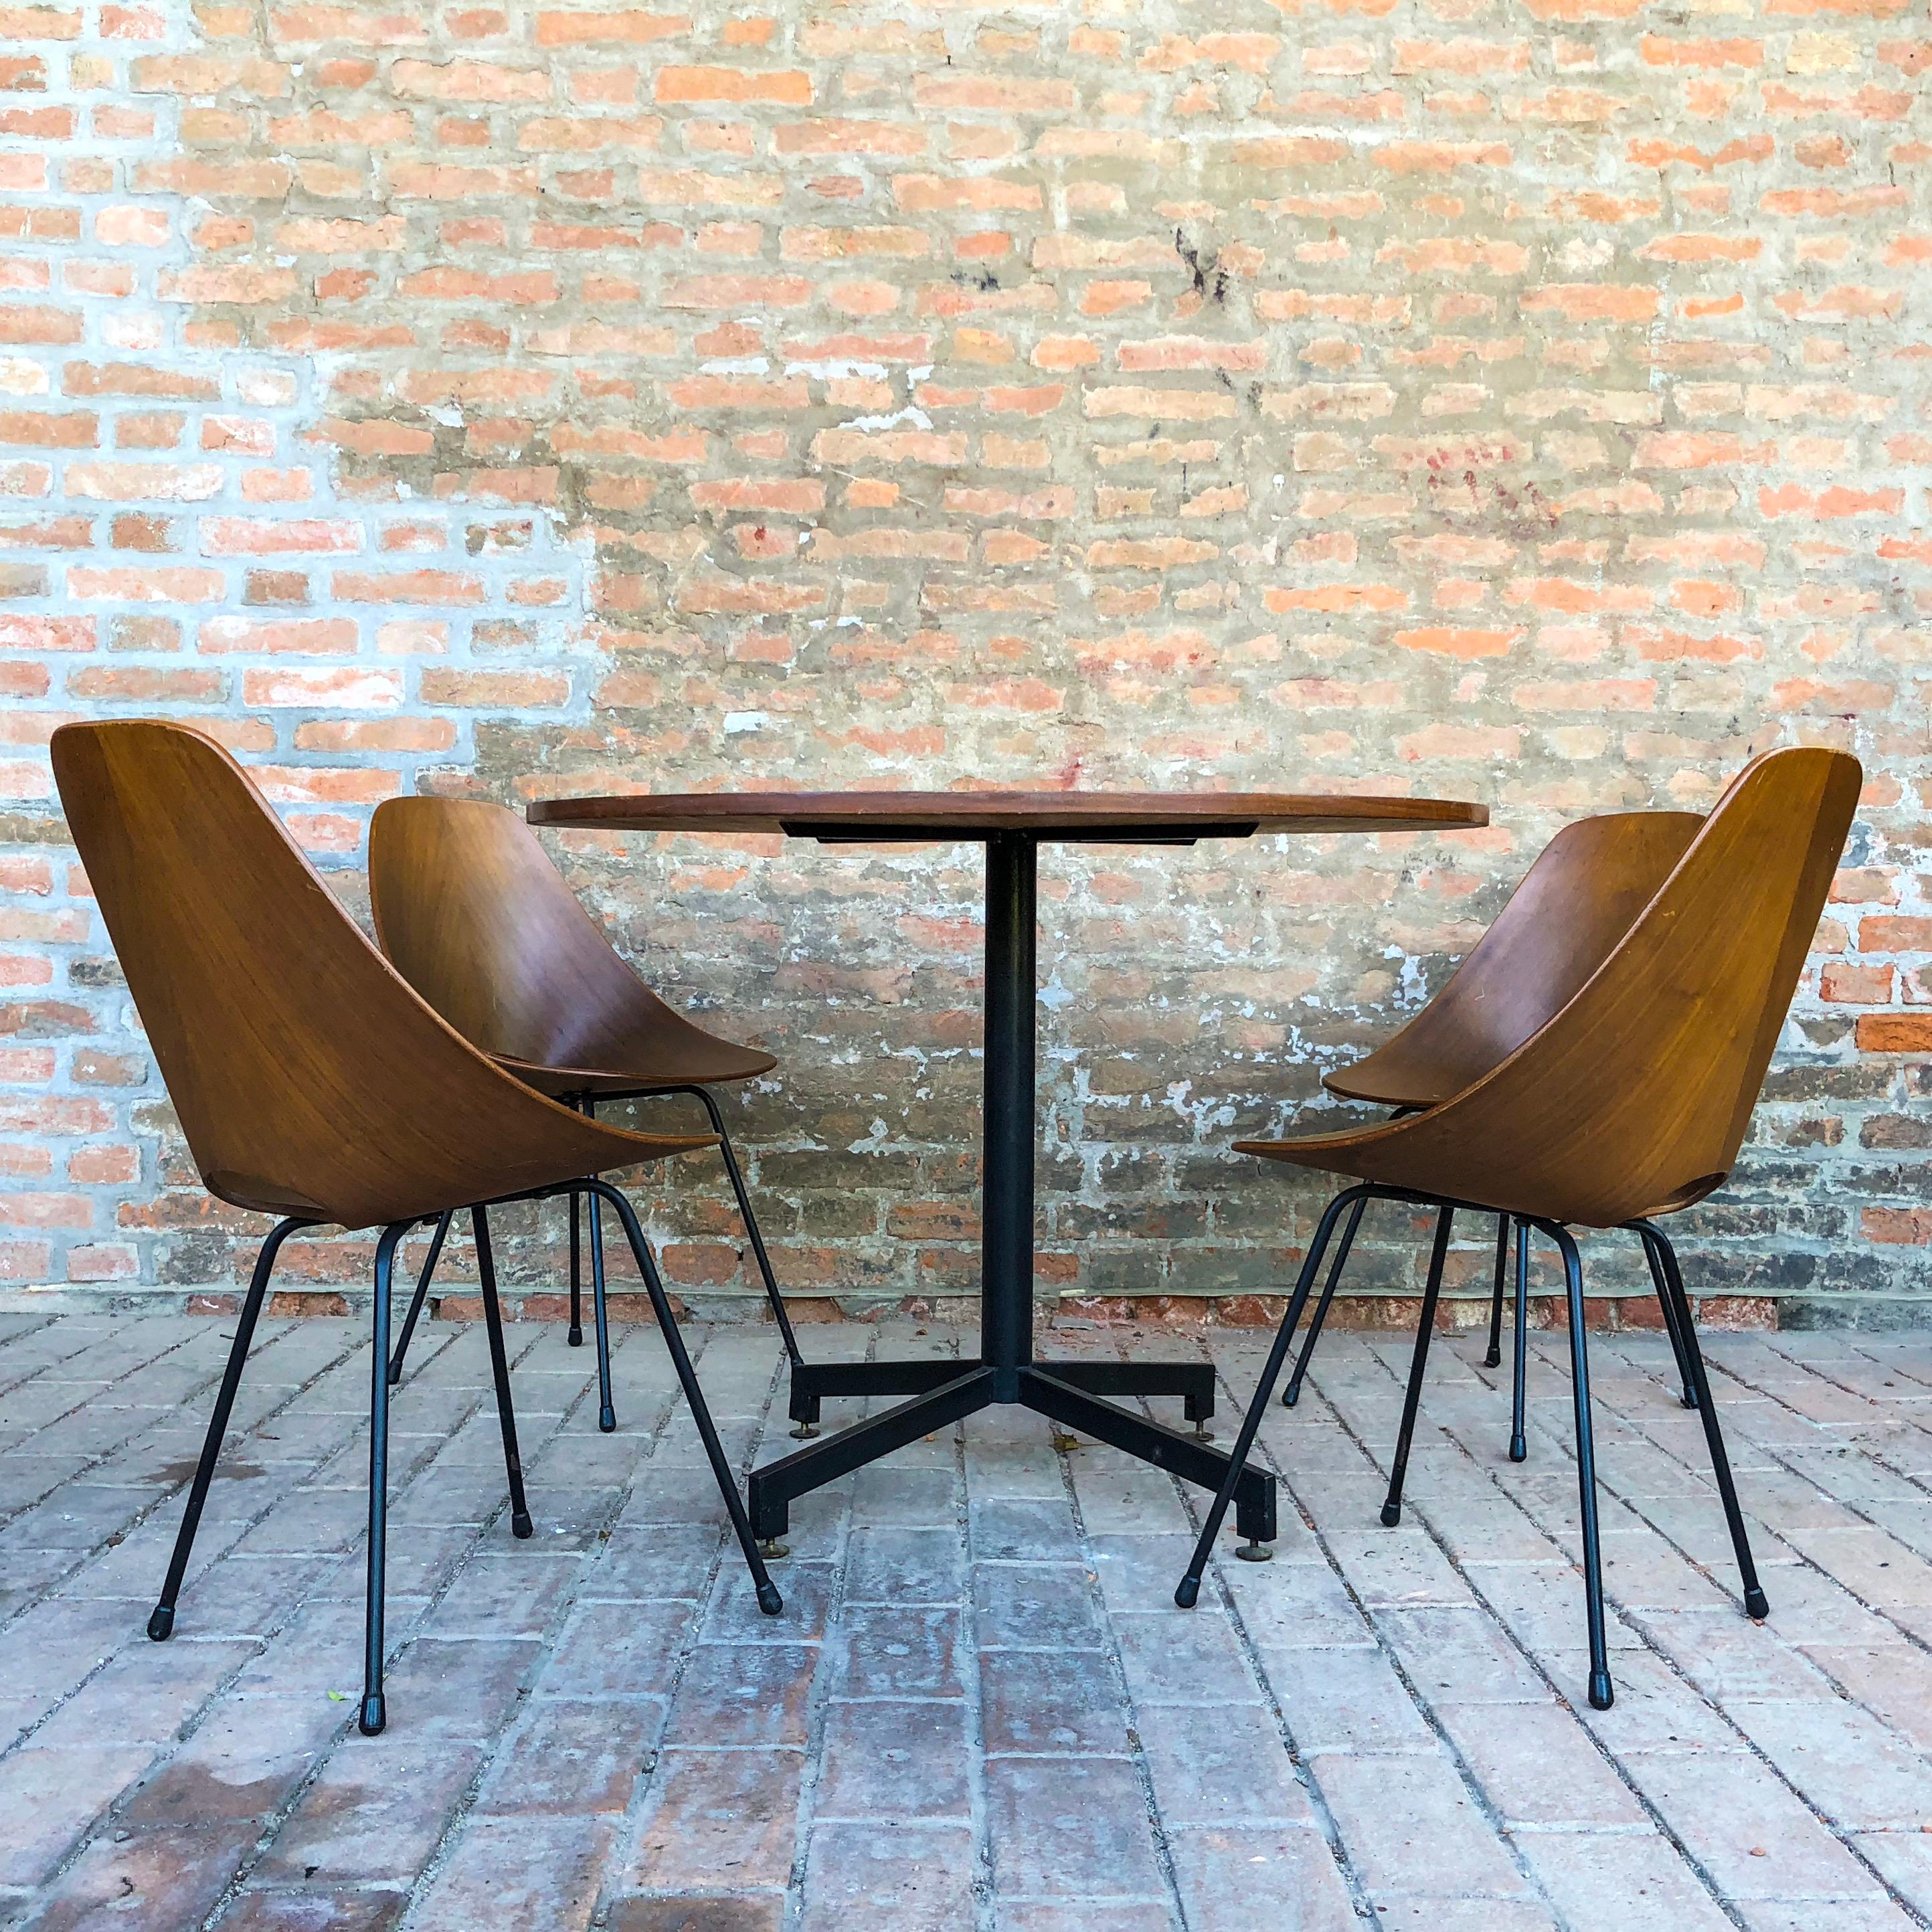 Vittorio Nobili Midcentury Teak Medea Dining Room Set with Table & Chairs, 1956 In Good Condition For Sale In Padova, IT